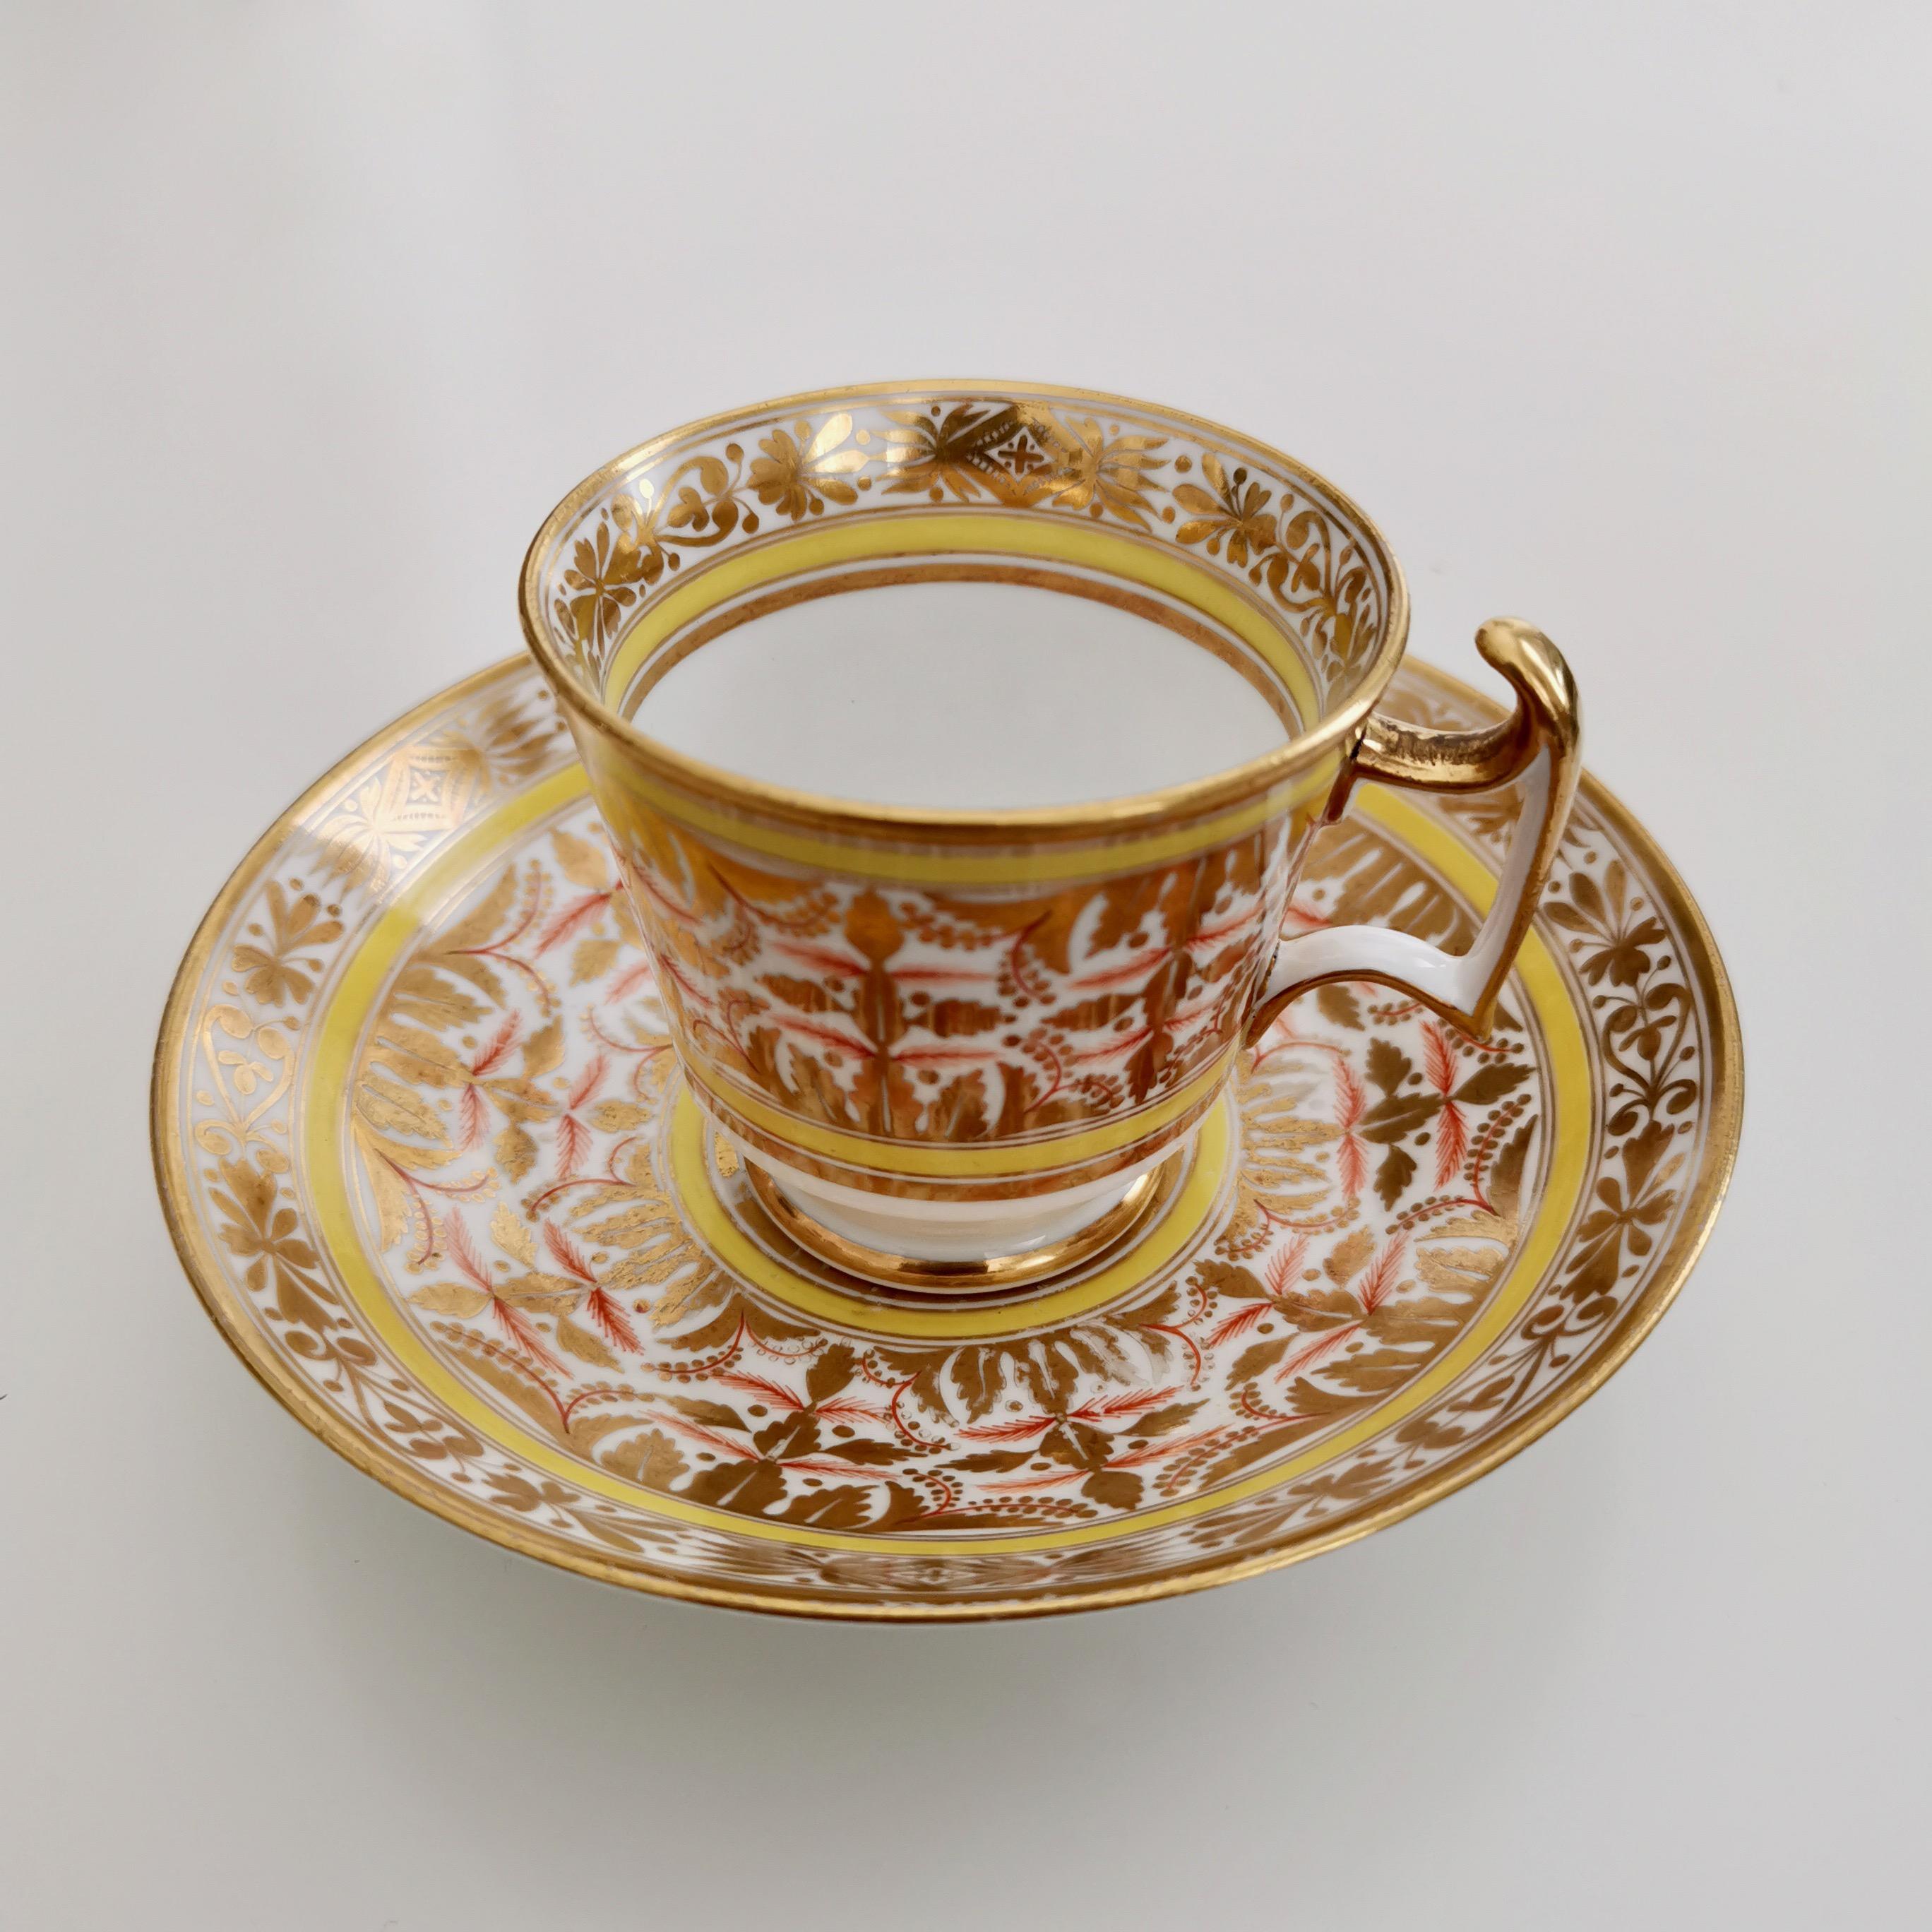 Hand-Painted Spode Porcelain Teacup Set, Gilt, Yellow and Red Regency Pattern, circa 1815